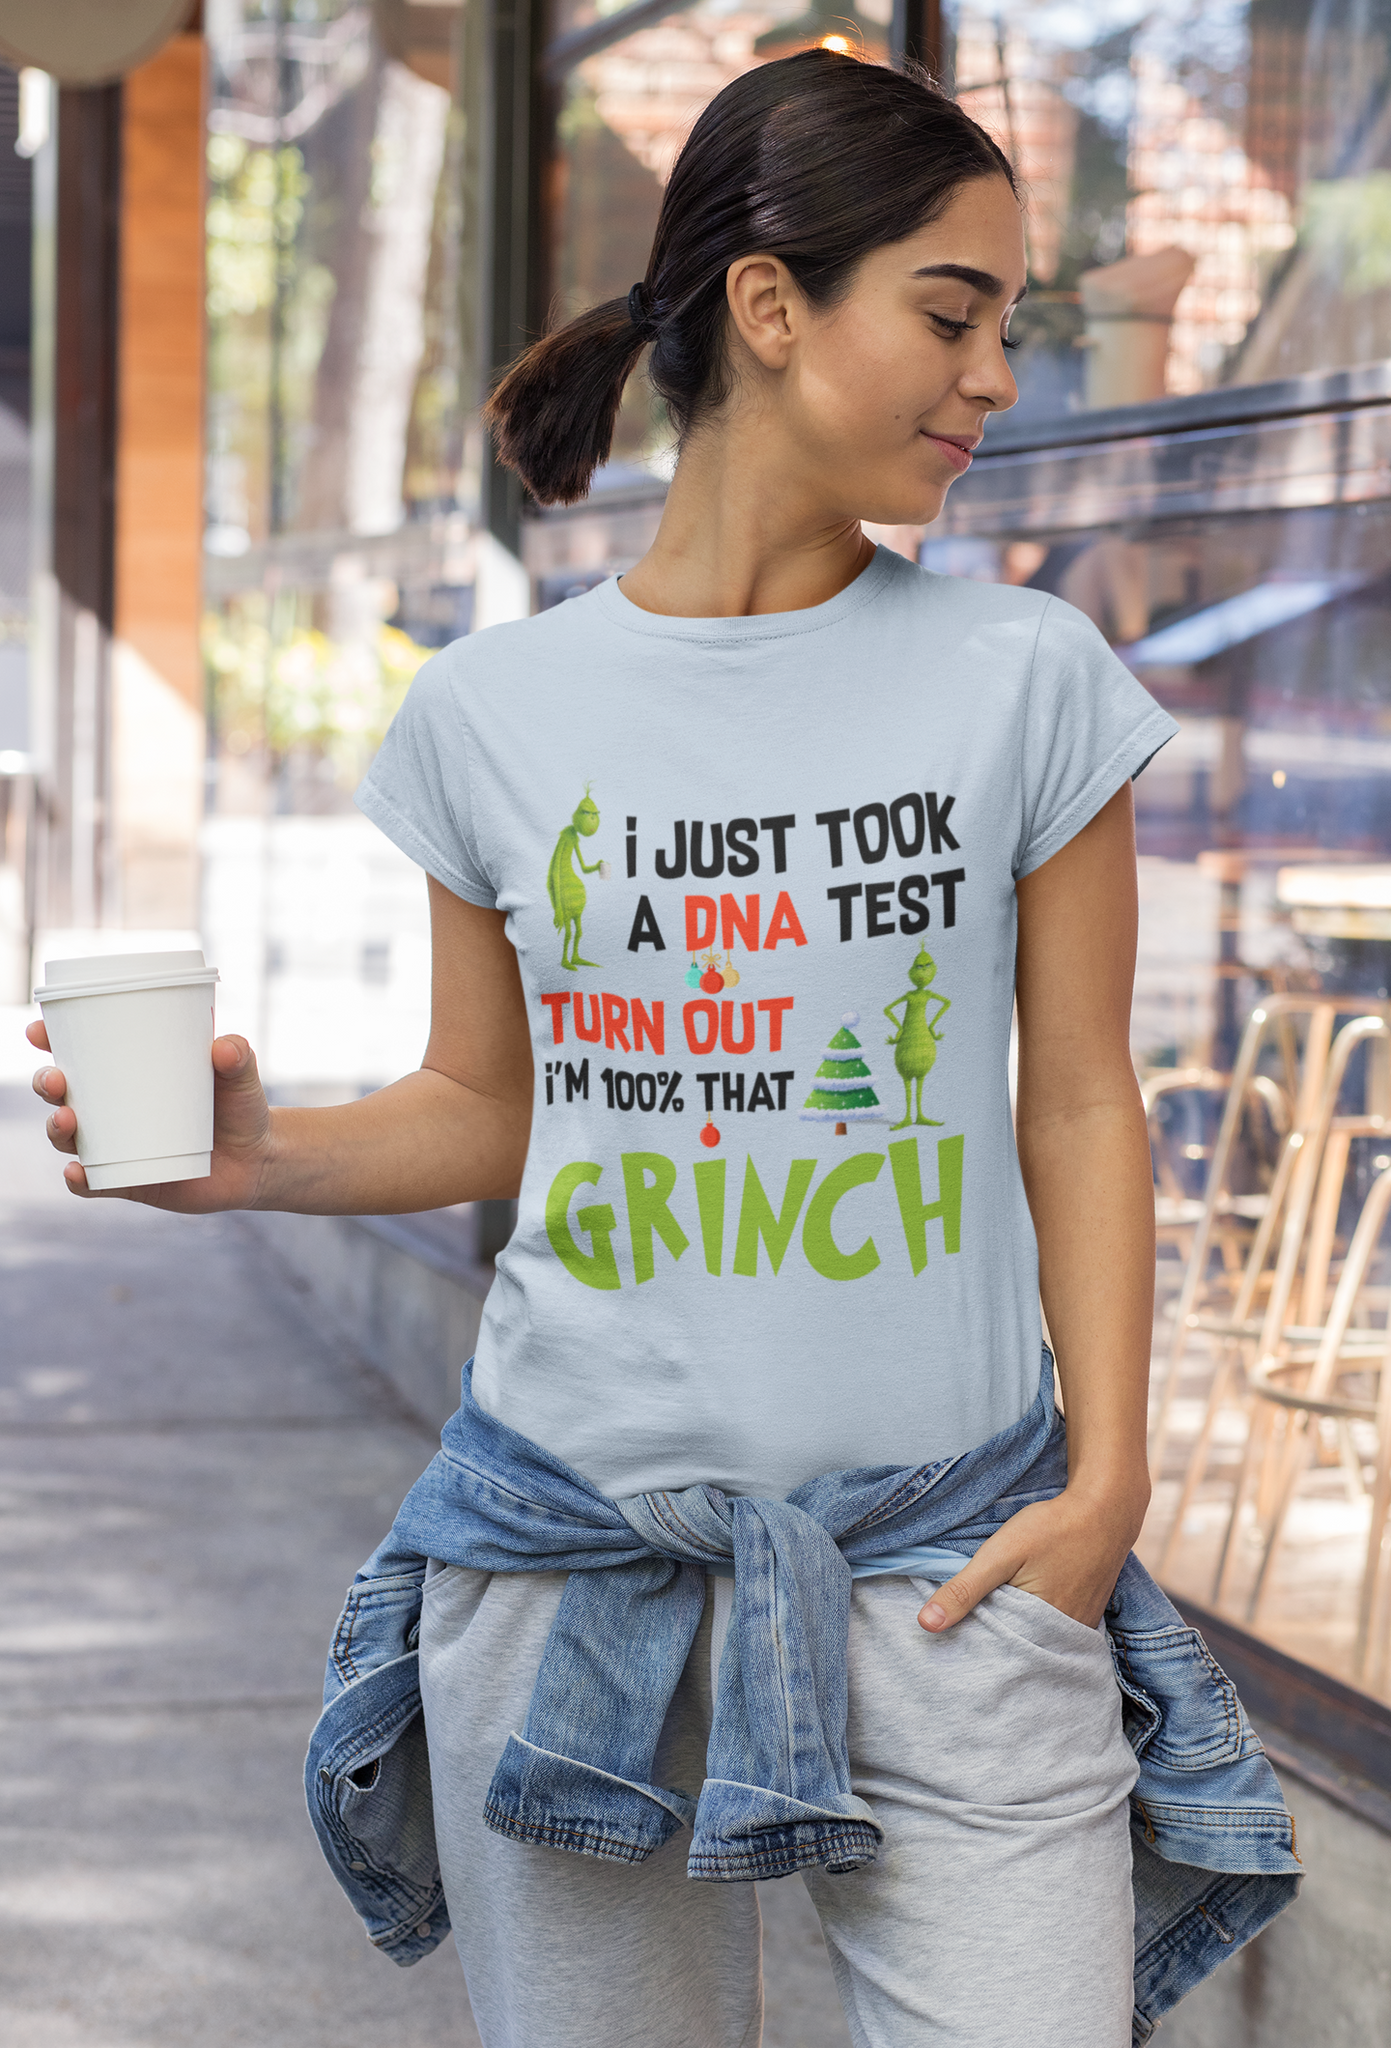 Grinch T Shirt, I Just Took A DNA Test T Shirt, Turn Out Im 100% That Grinch Tshirt, Christmas Movie Shirt, Christmas Gifts